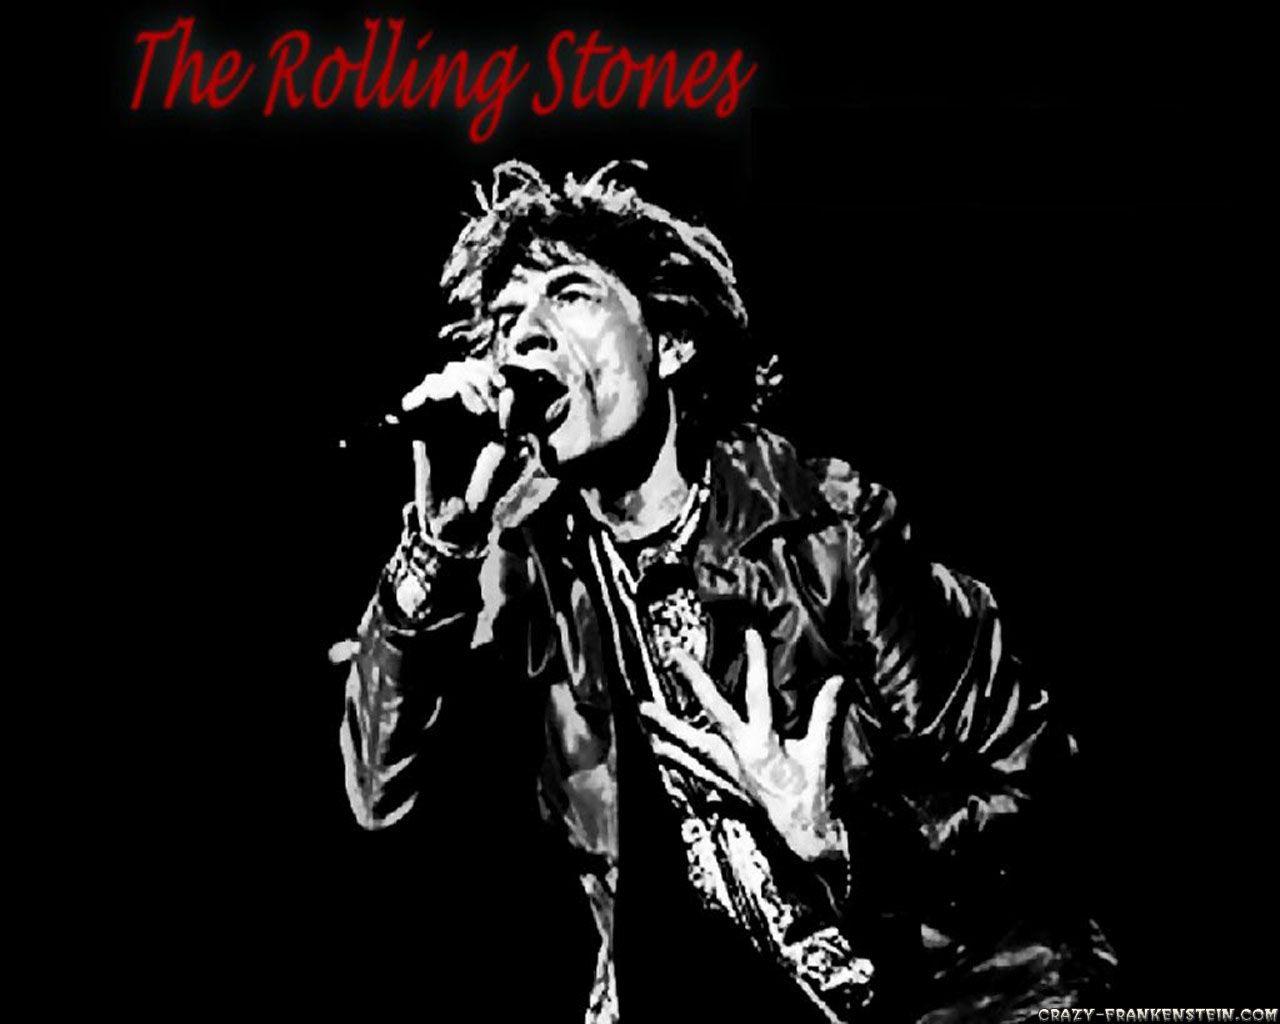 The Rolling Stones Wallpaper High Resolution #QU65F45